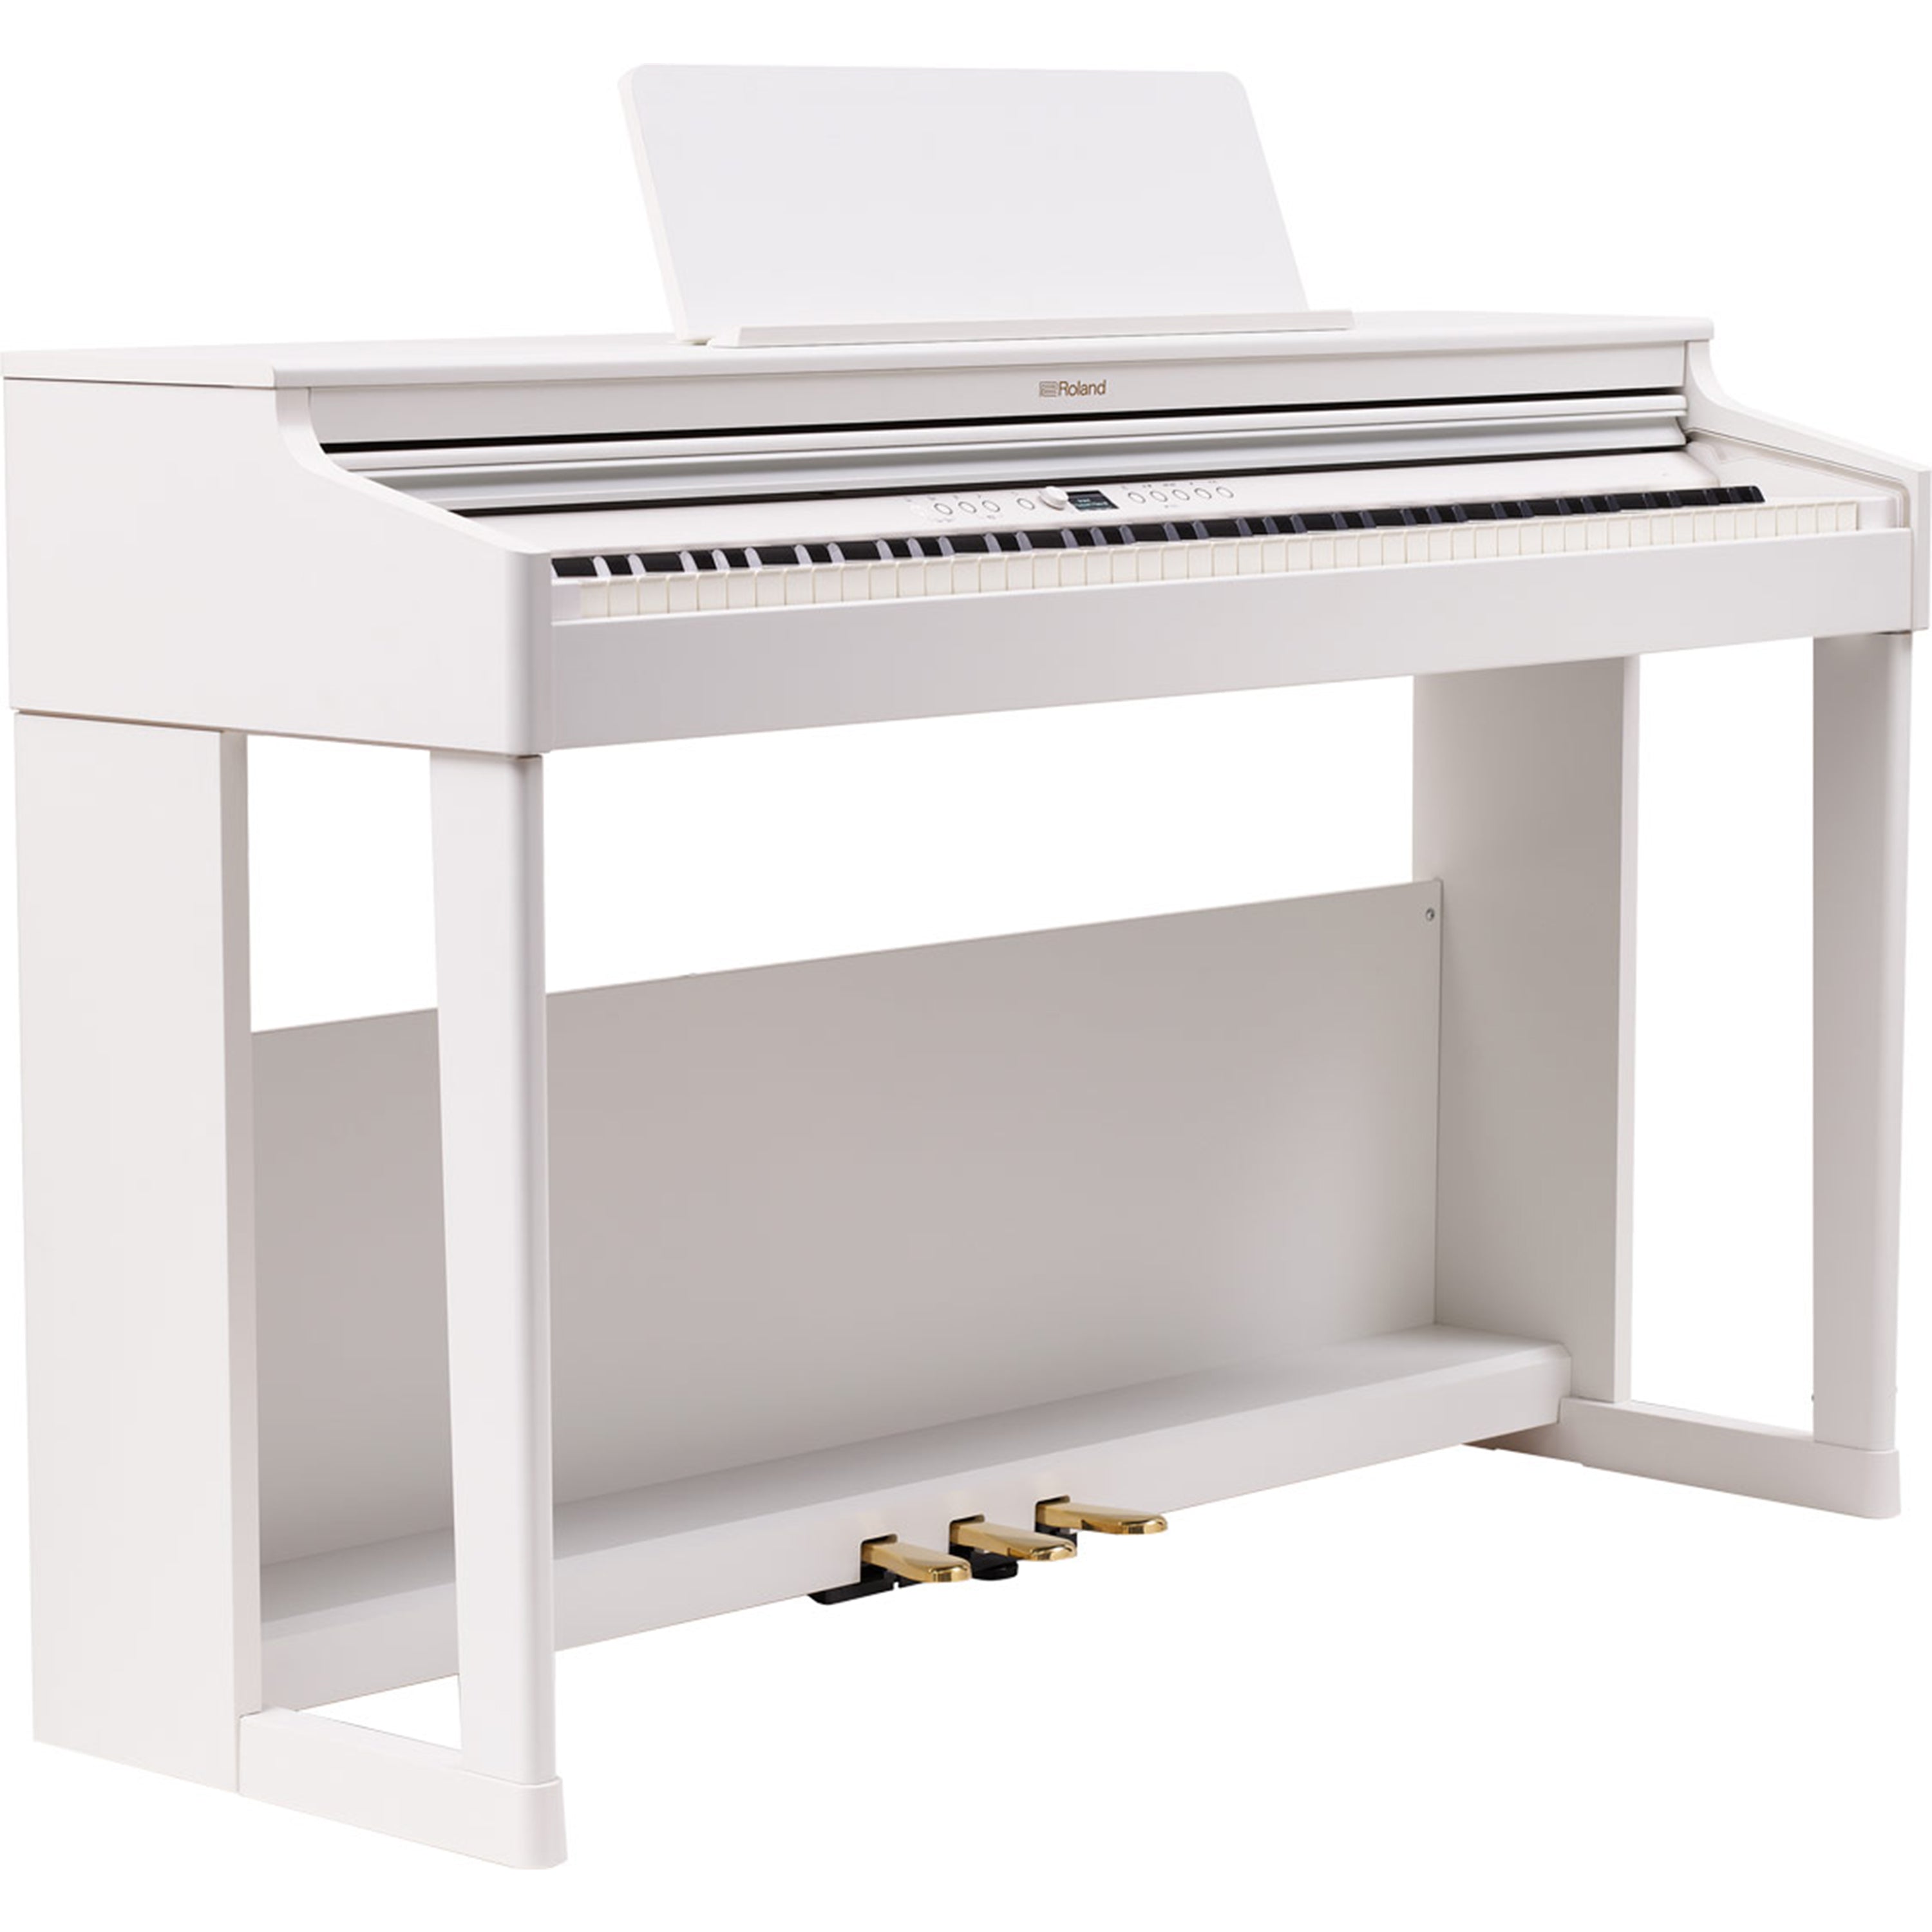 Roland RP701 Digital Piano - Satin White - right facing side view